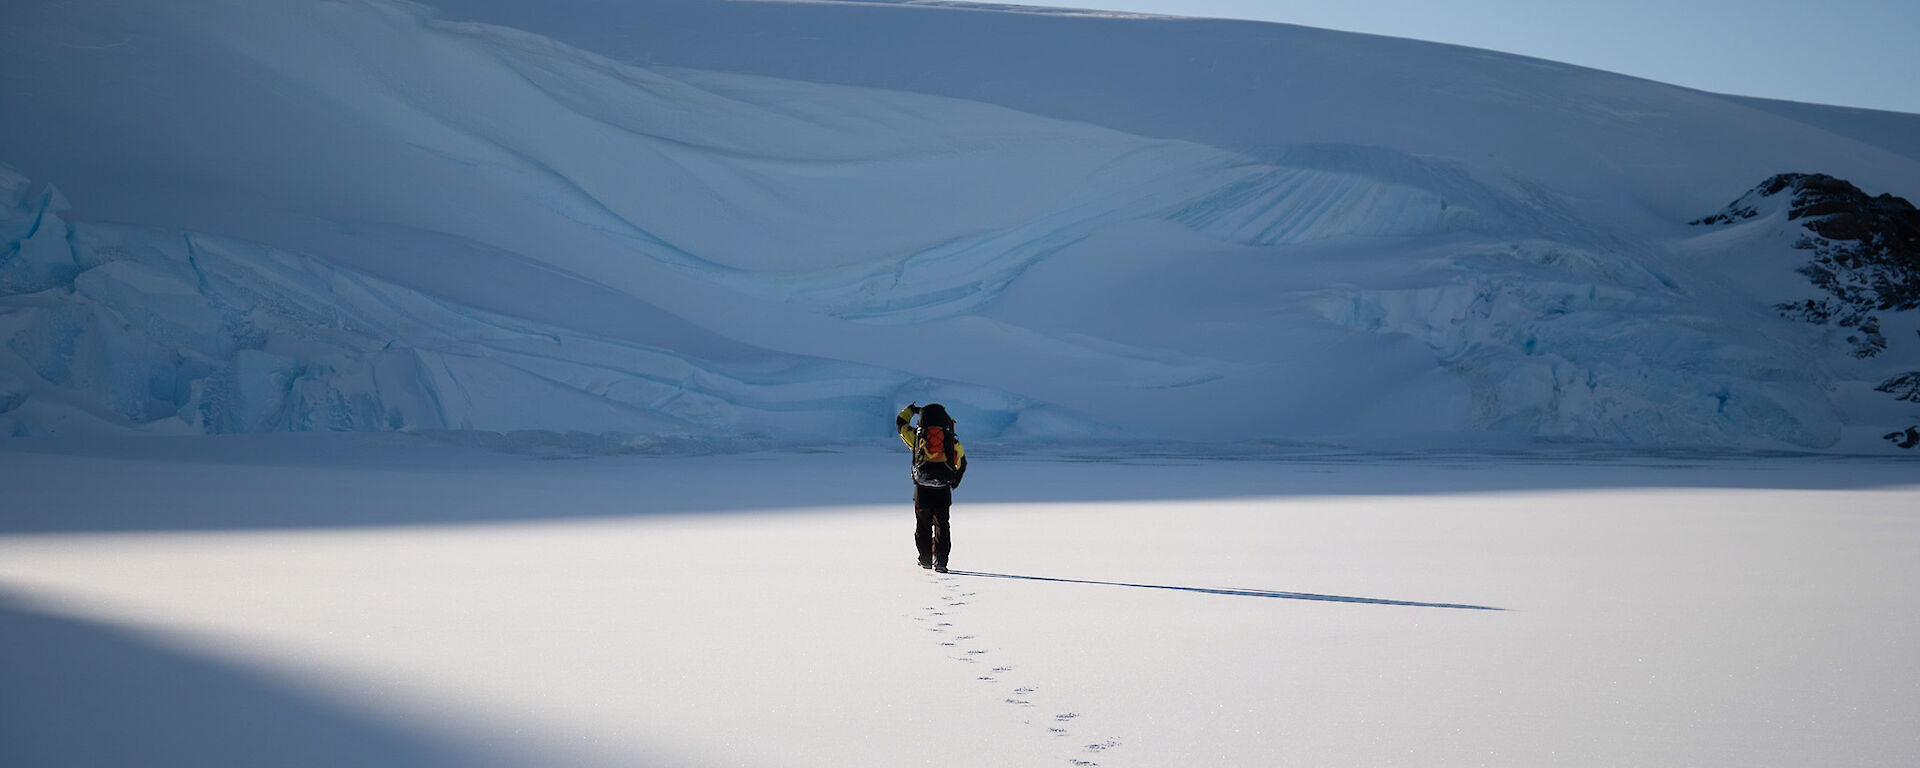 A behind view of an Antarctic expeditioner walking in the snow towards a large snowy ridge